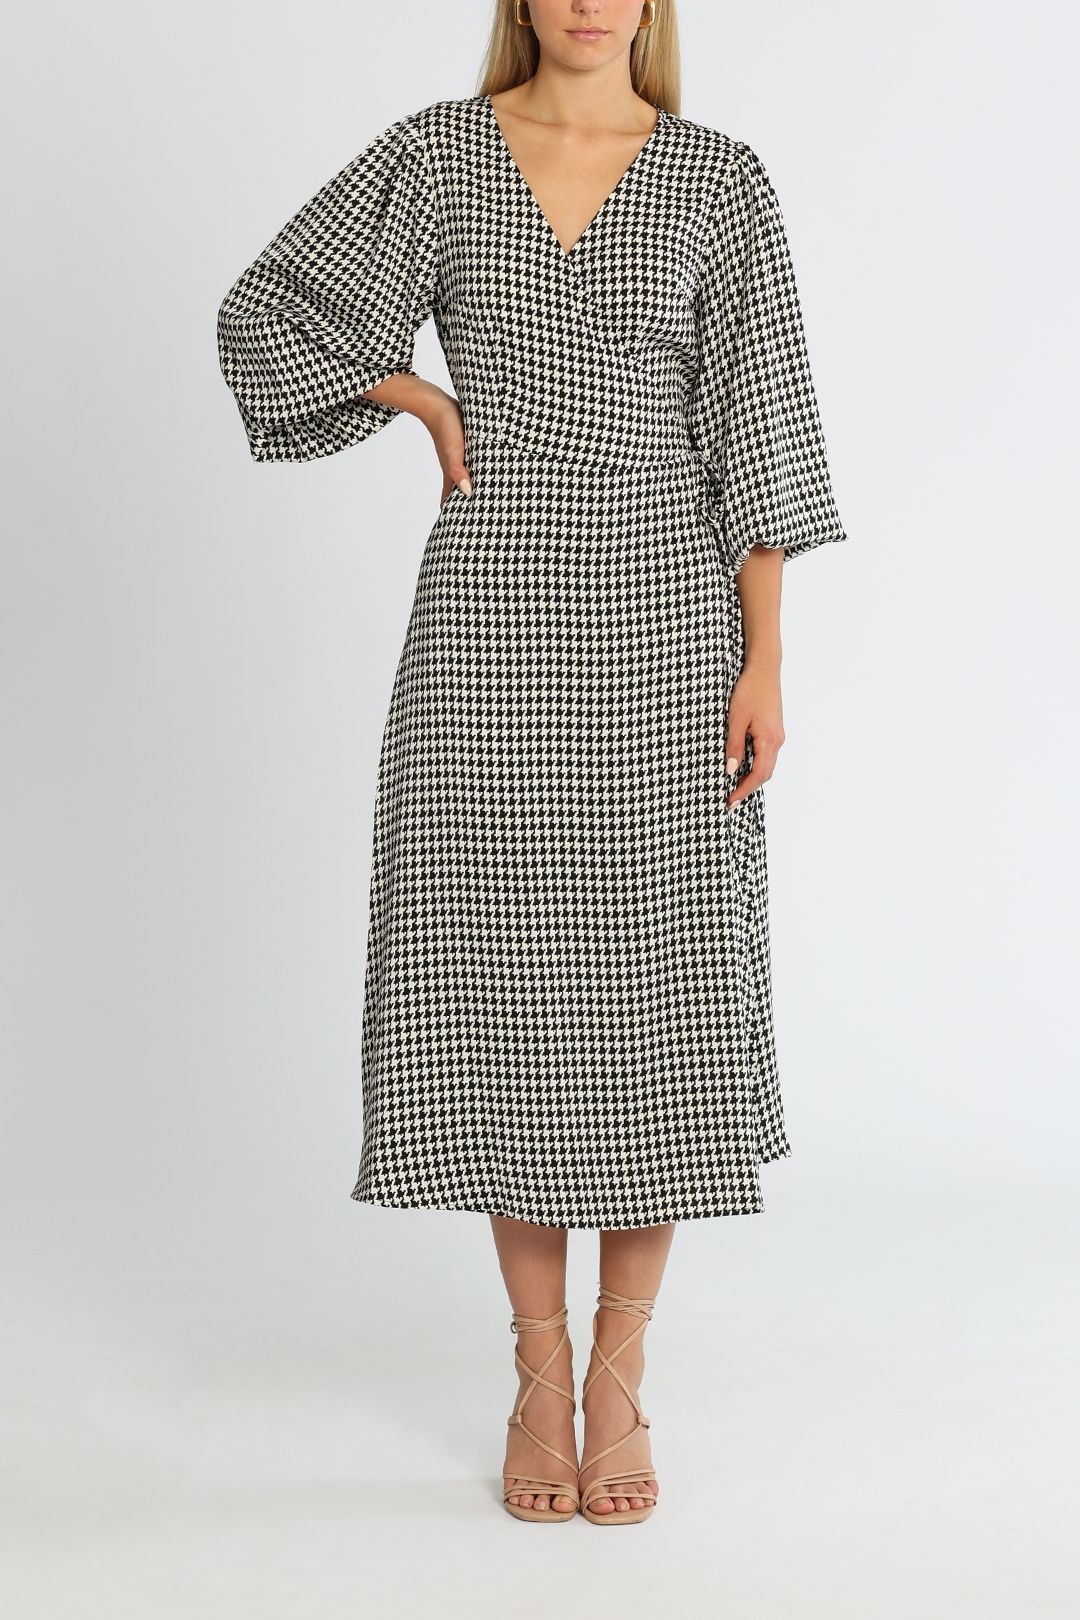 Brave and True Jessica Long Sleeve Dress Black Houndstooth